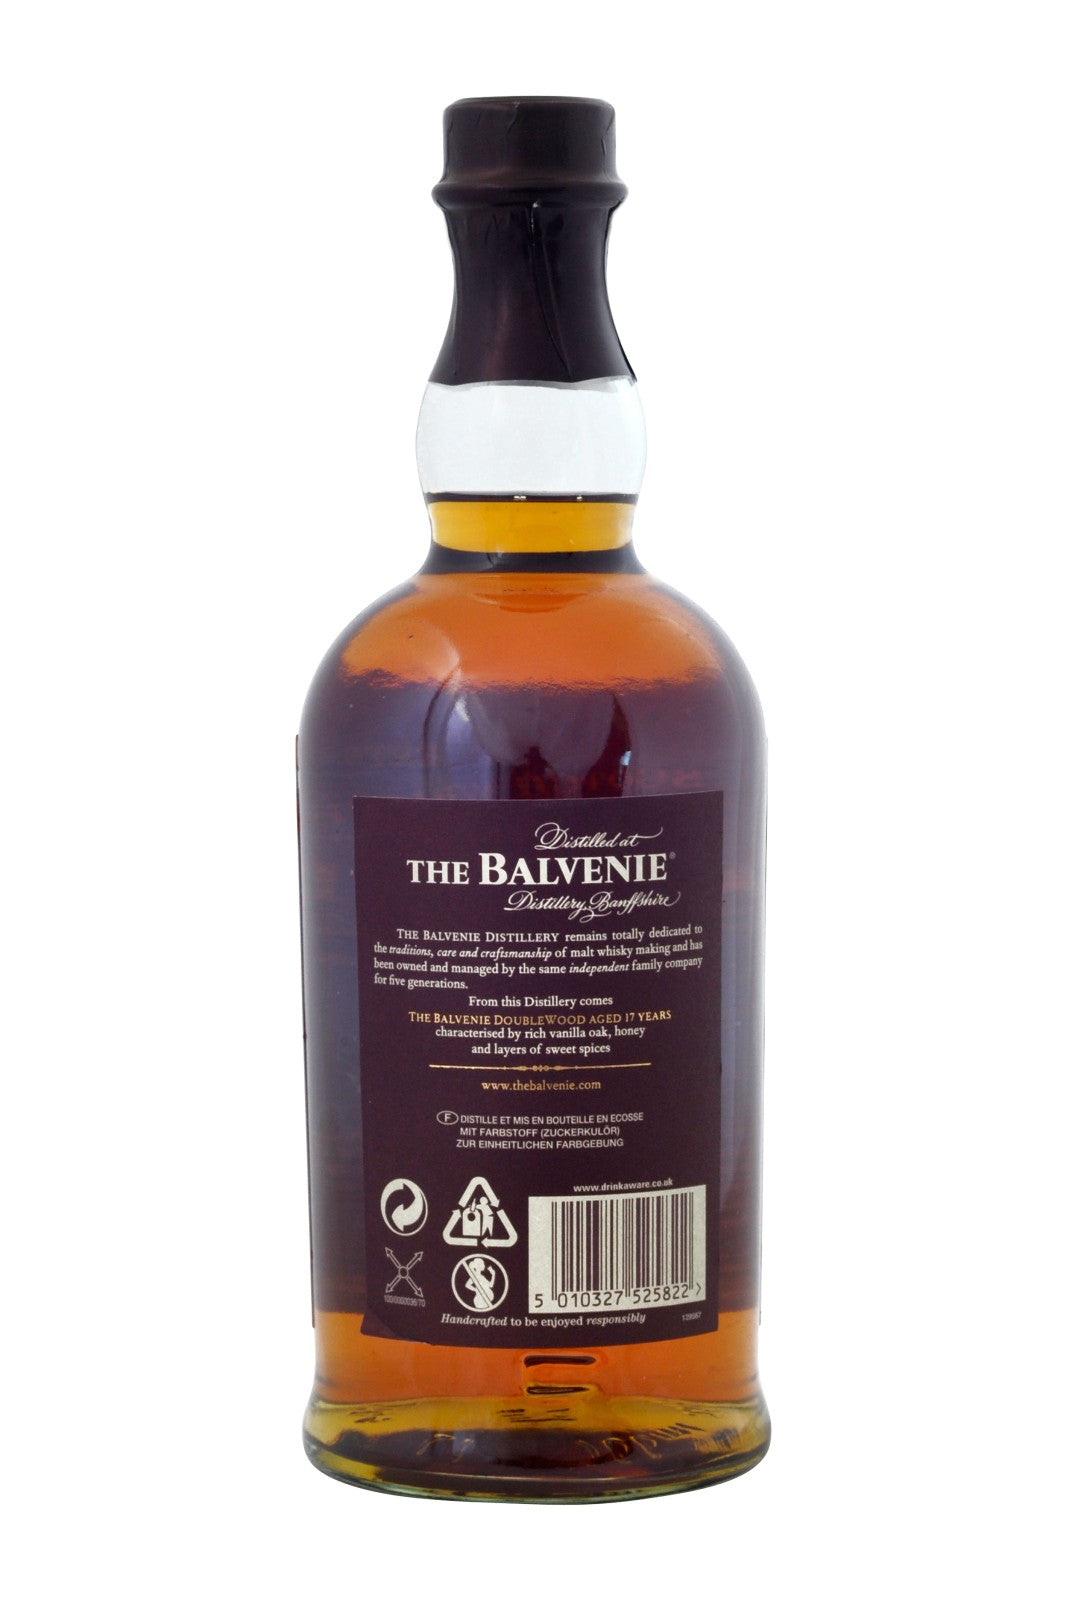 Balvenie 17 Year Old Double Wood